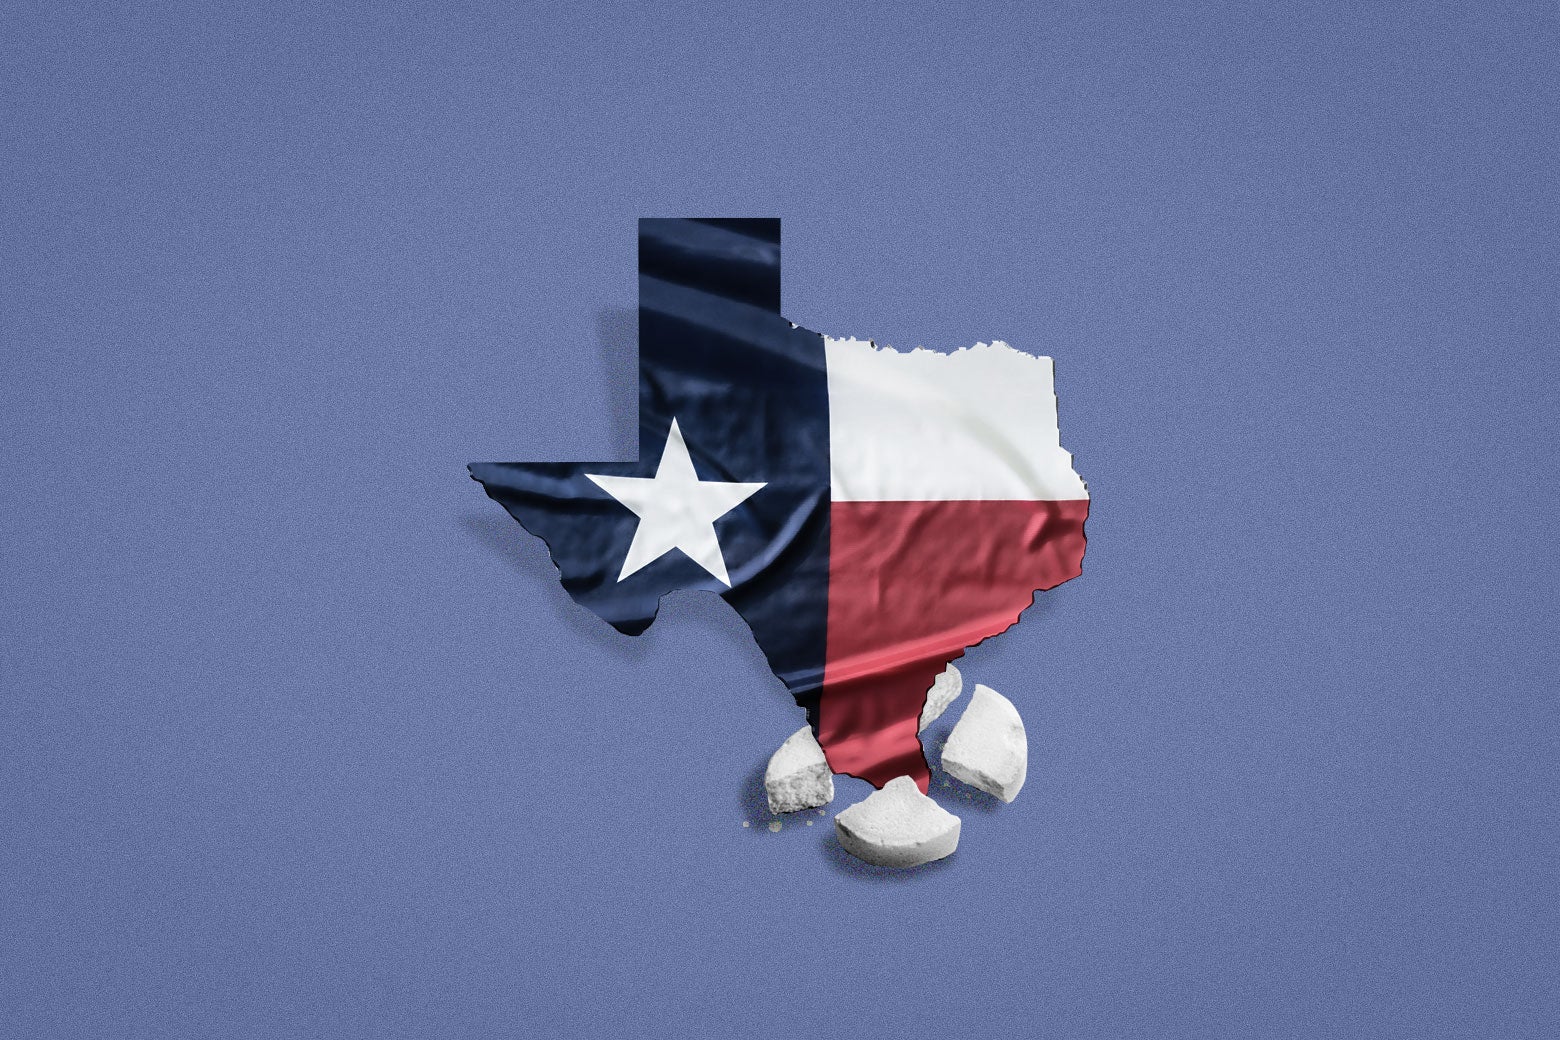 The state of Texas is shown crushing a pill.